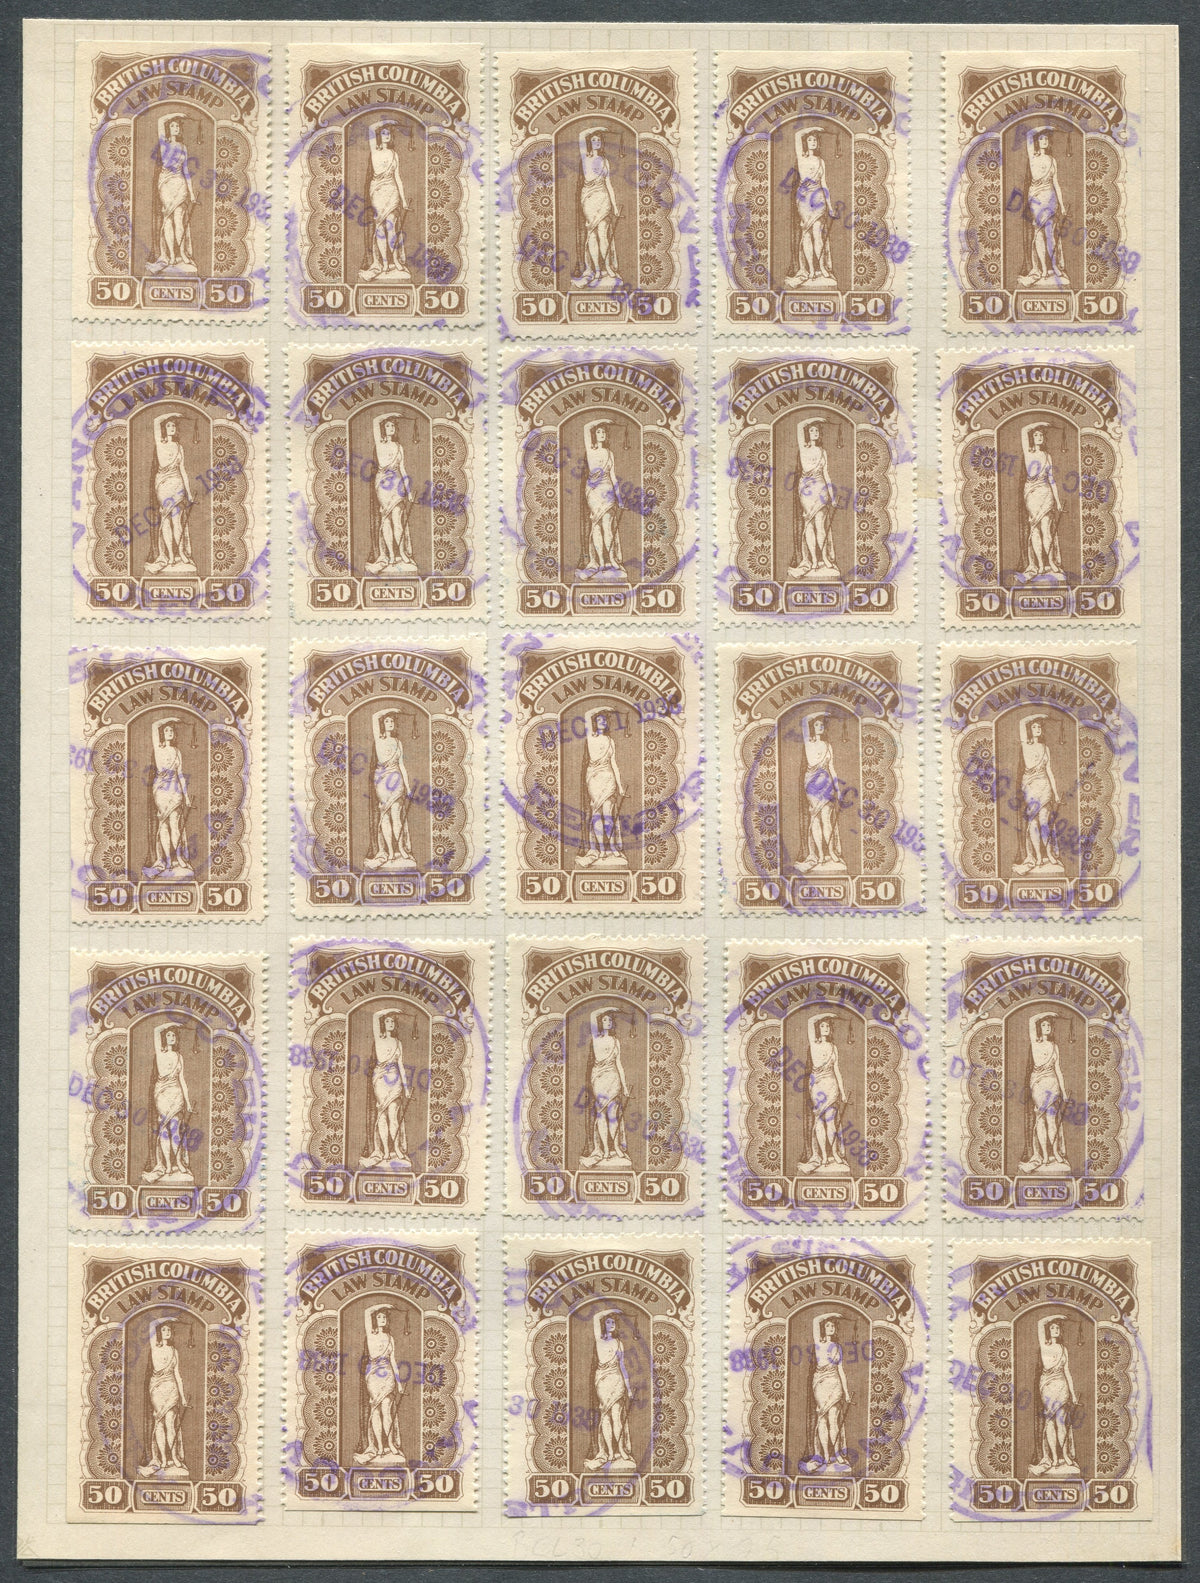 0030BC2010 - BCL30 - Used Reconstructed Sheet